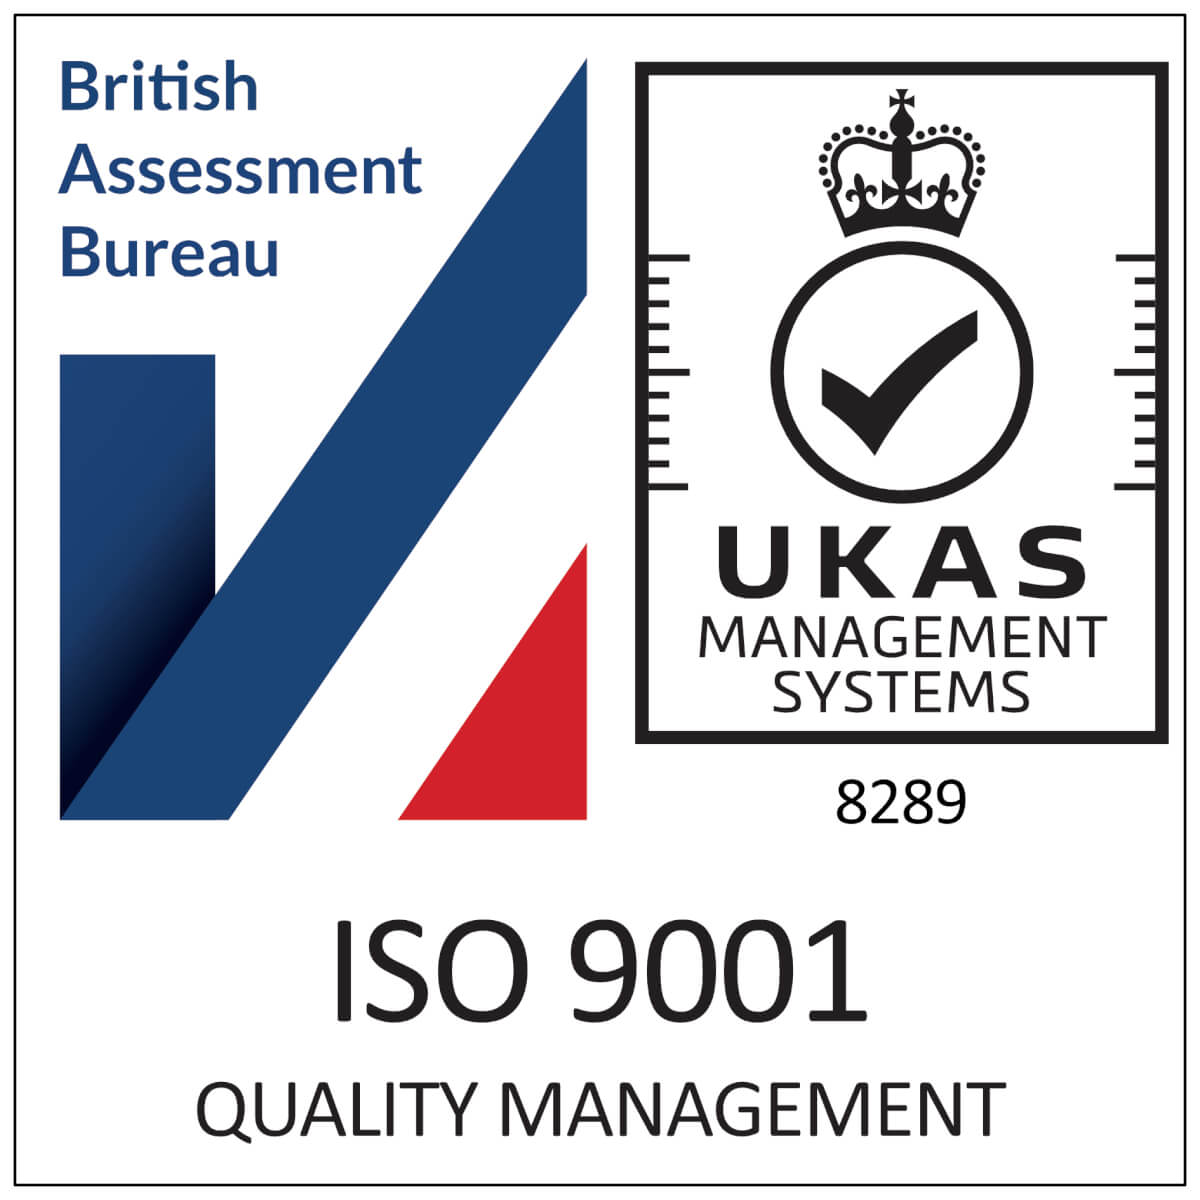 ISO9001 Quality Management